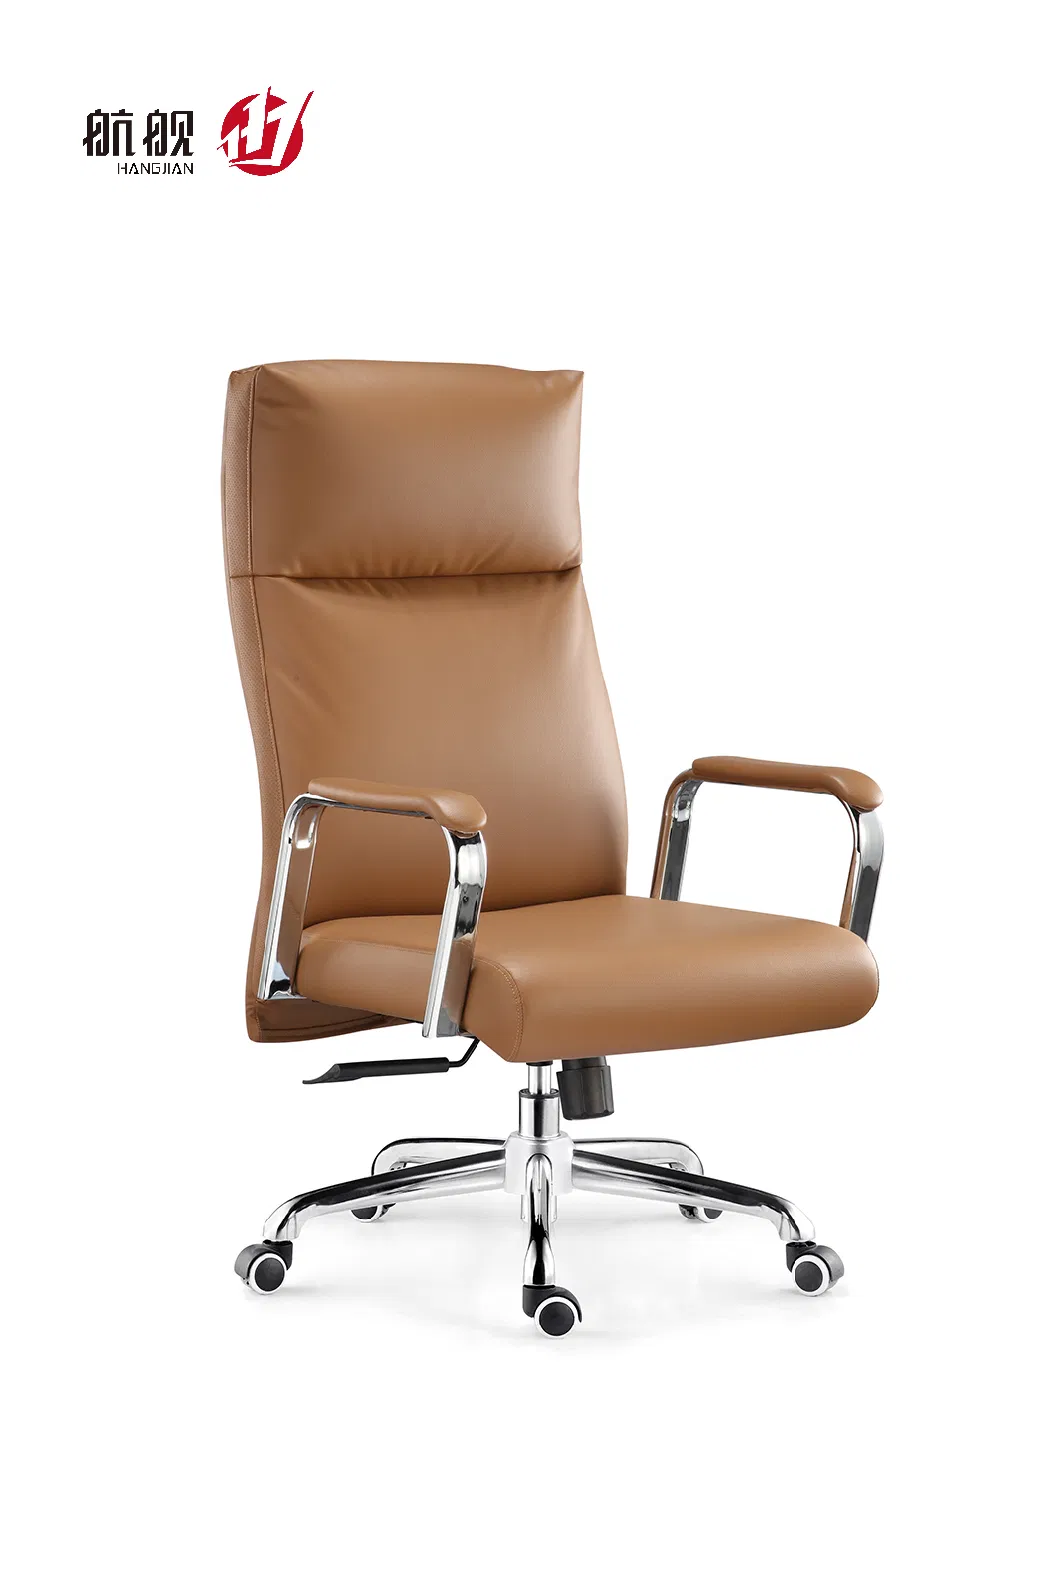 High Back Modern Office Furniture Comfort Soft Executive Chair for Law Firm